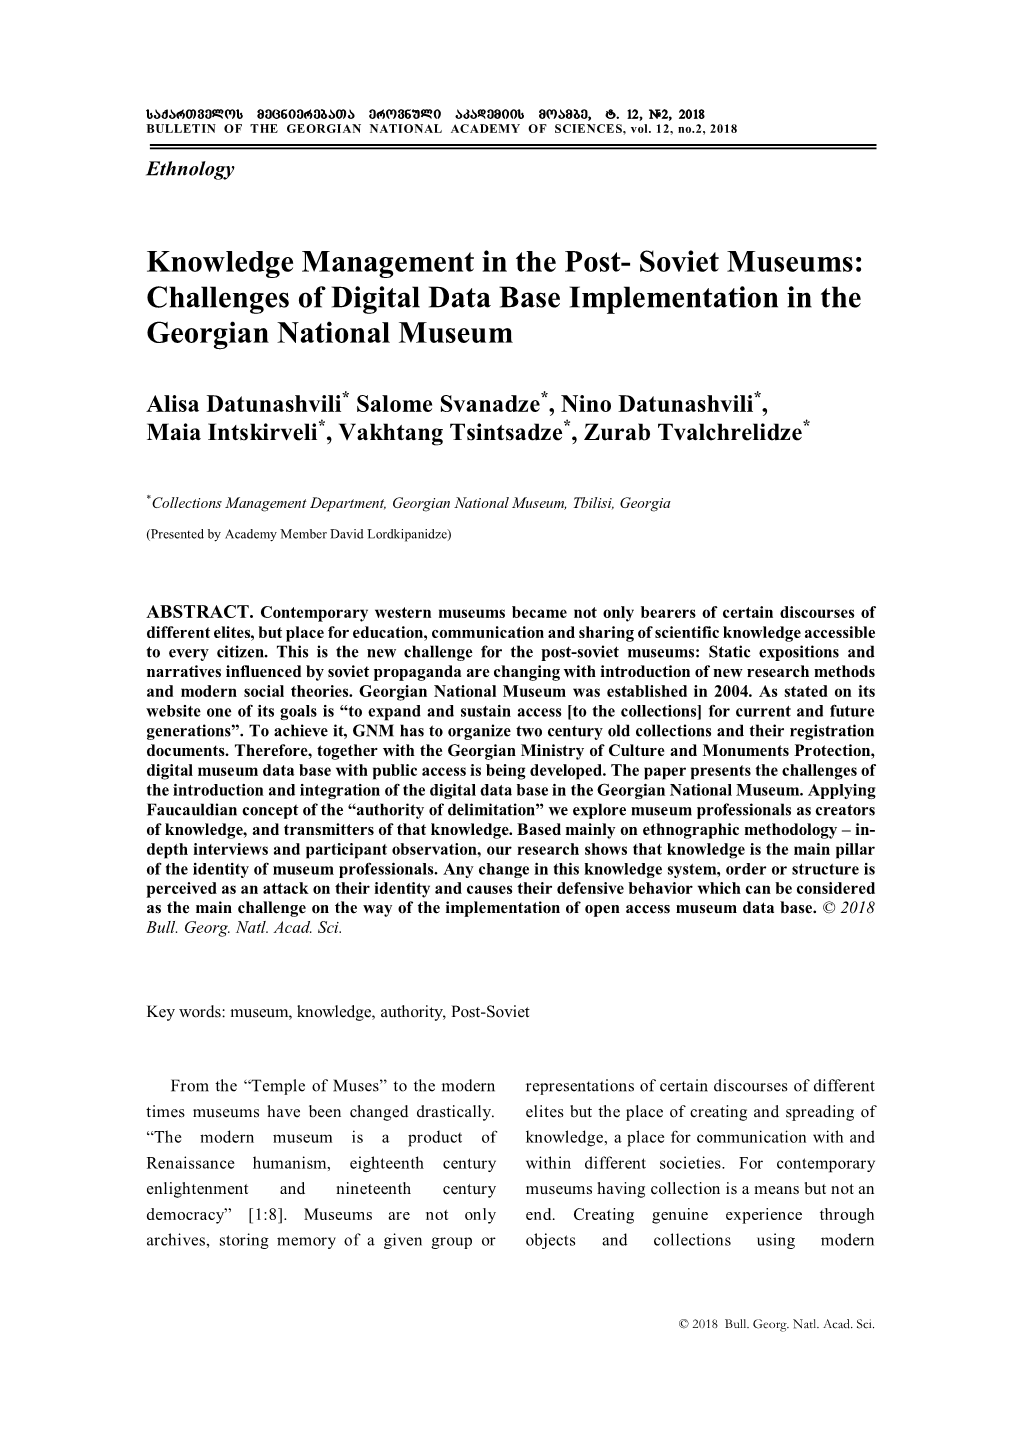 Knowledge Management in the Post- Soviet Museums: Challenges of Digital Data Base Implementation in the Georgian National Museum